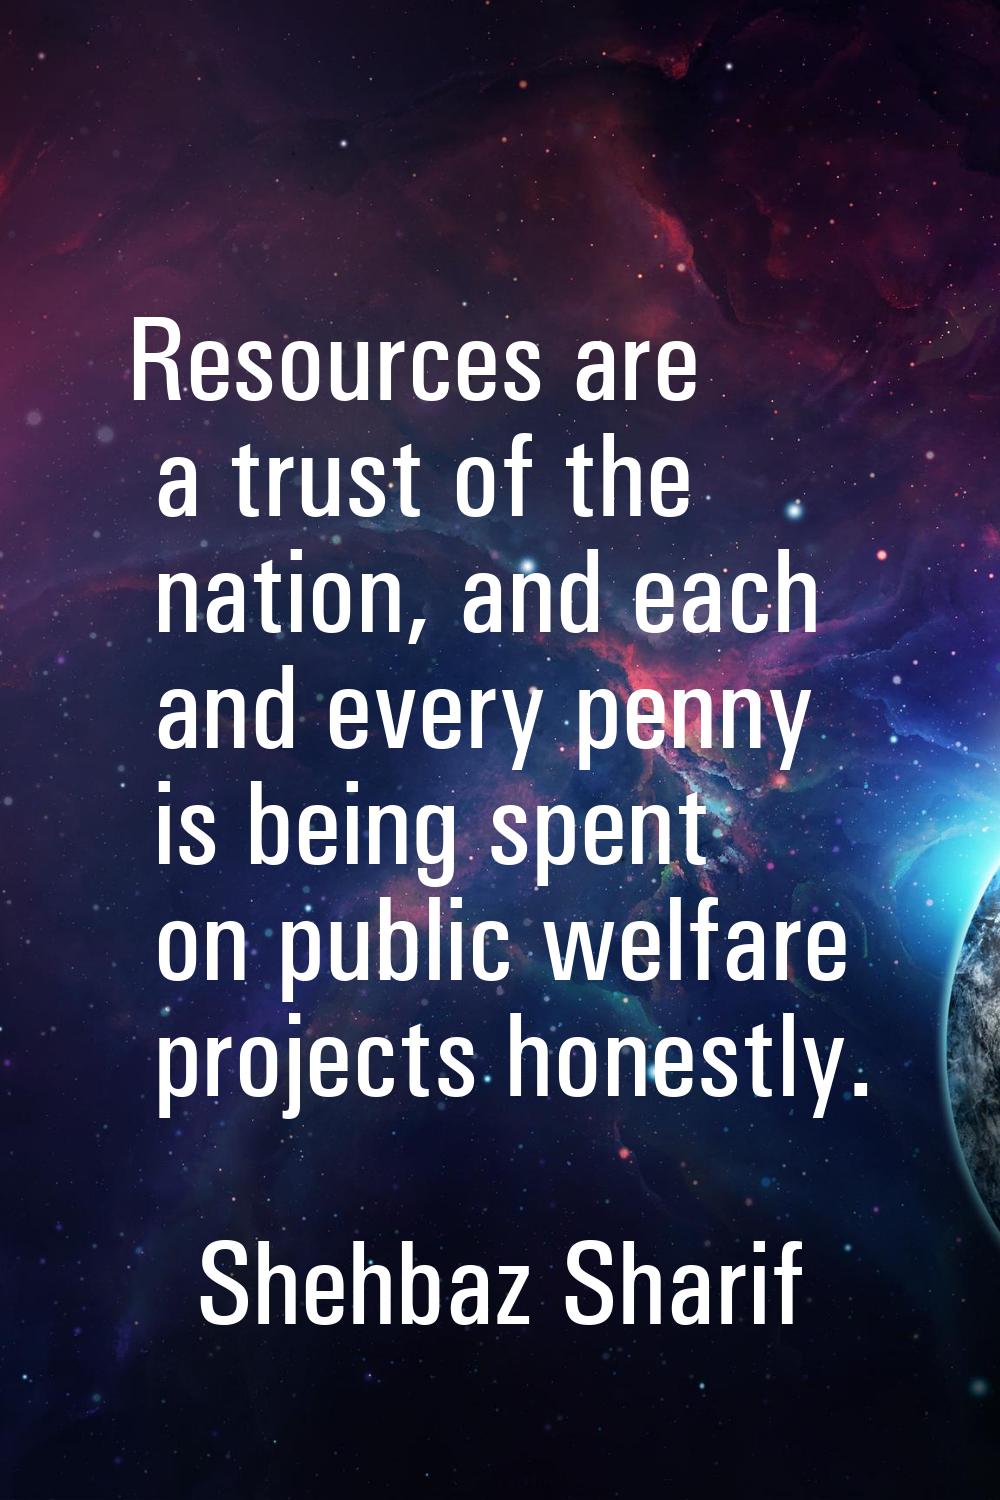 Resources are a trust of the nation, and each and every penny is being spent on public welfare proj